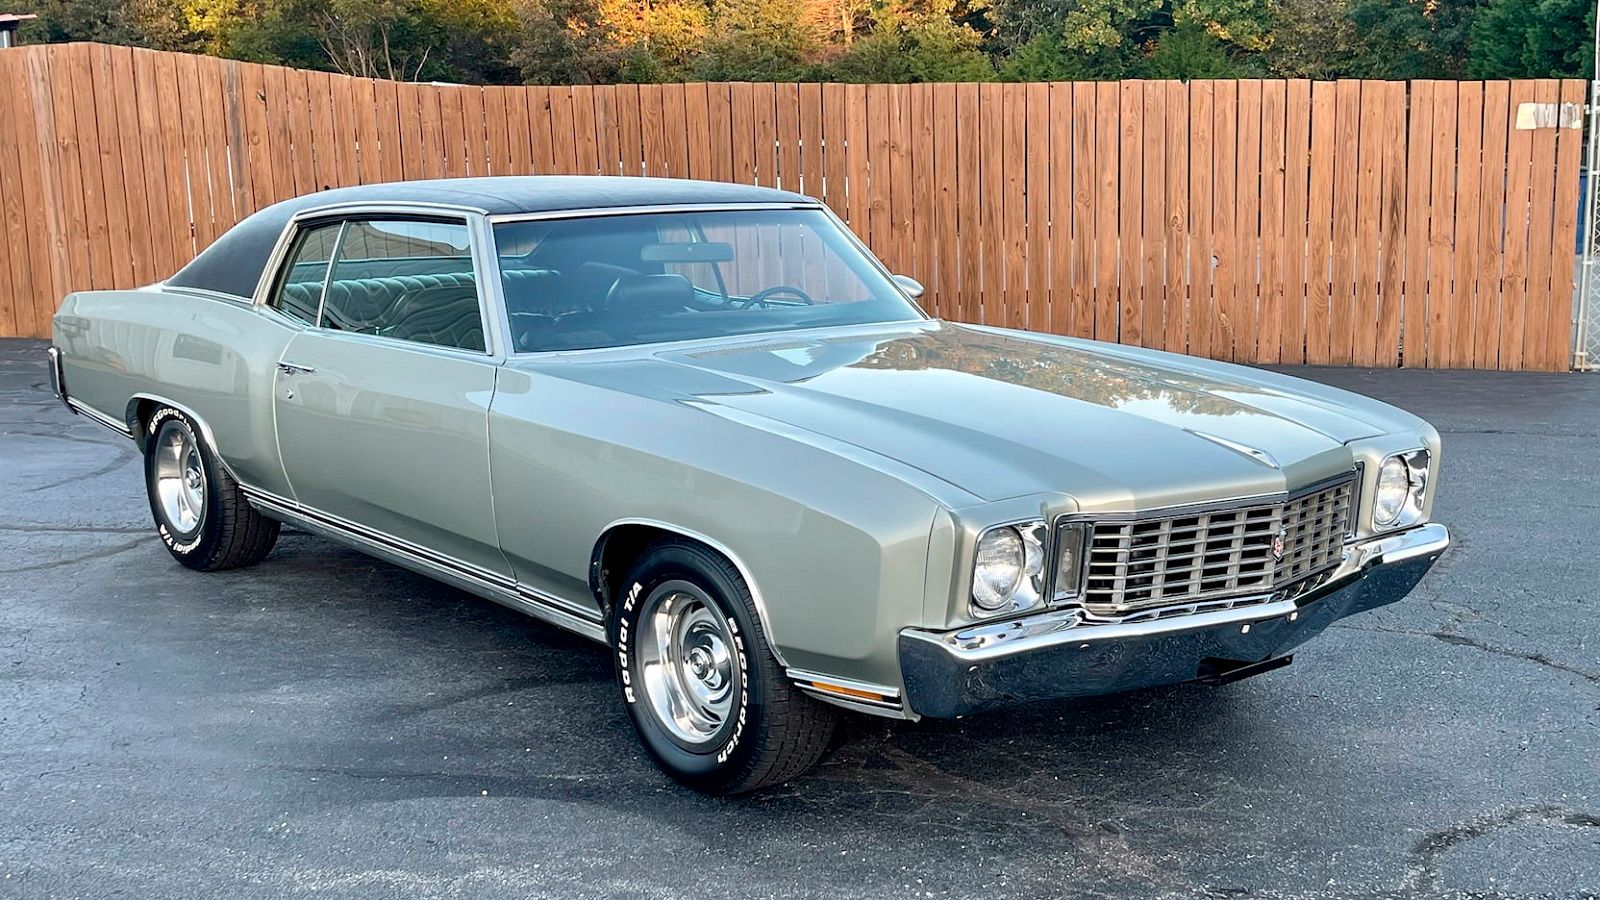 A parked 1972 Chevrolet Monte Carlo